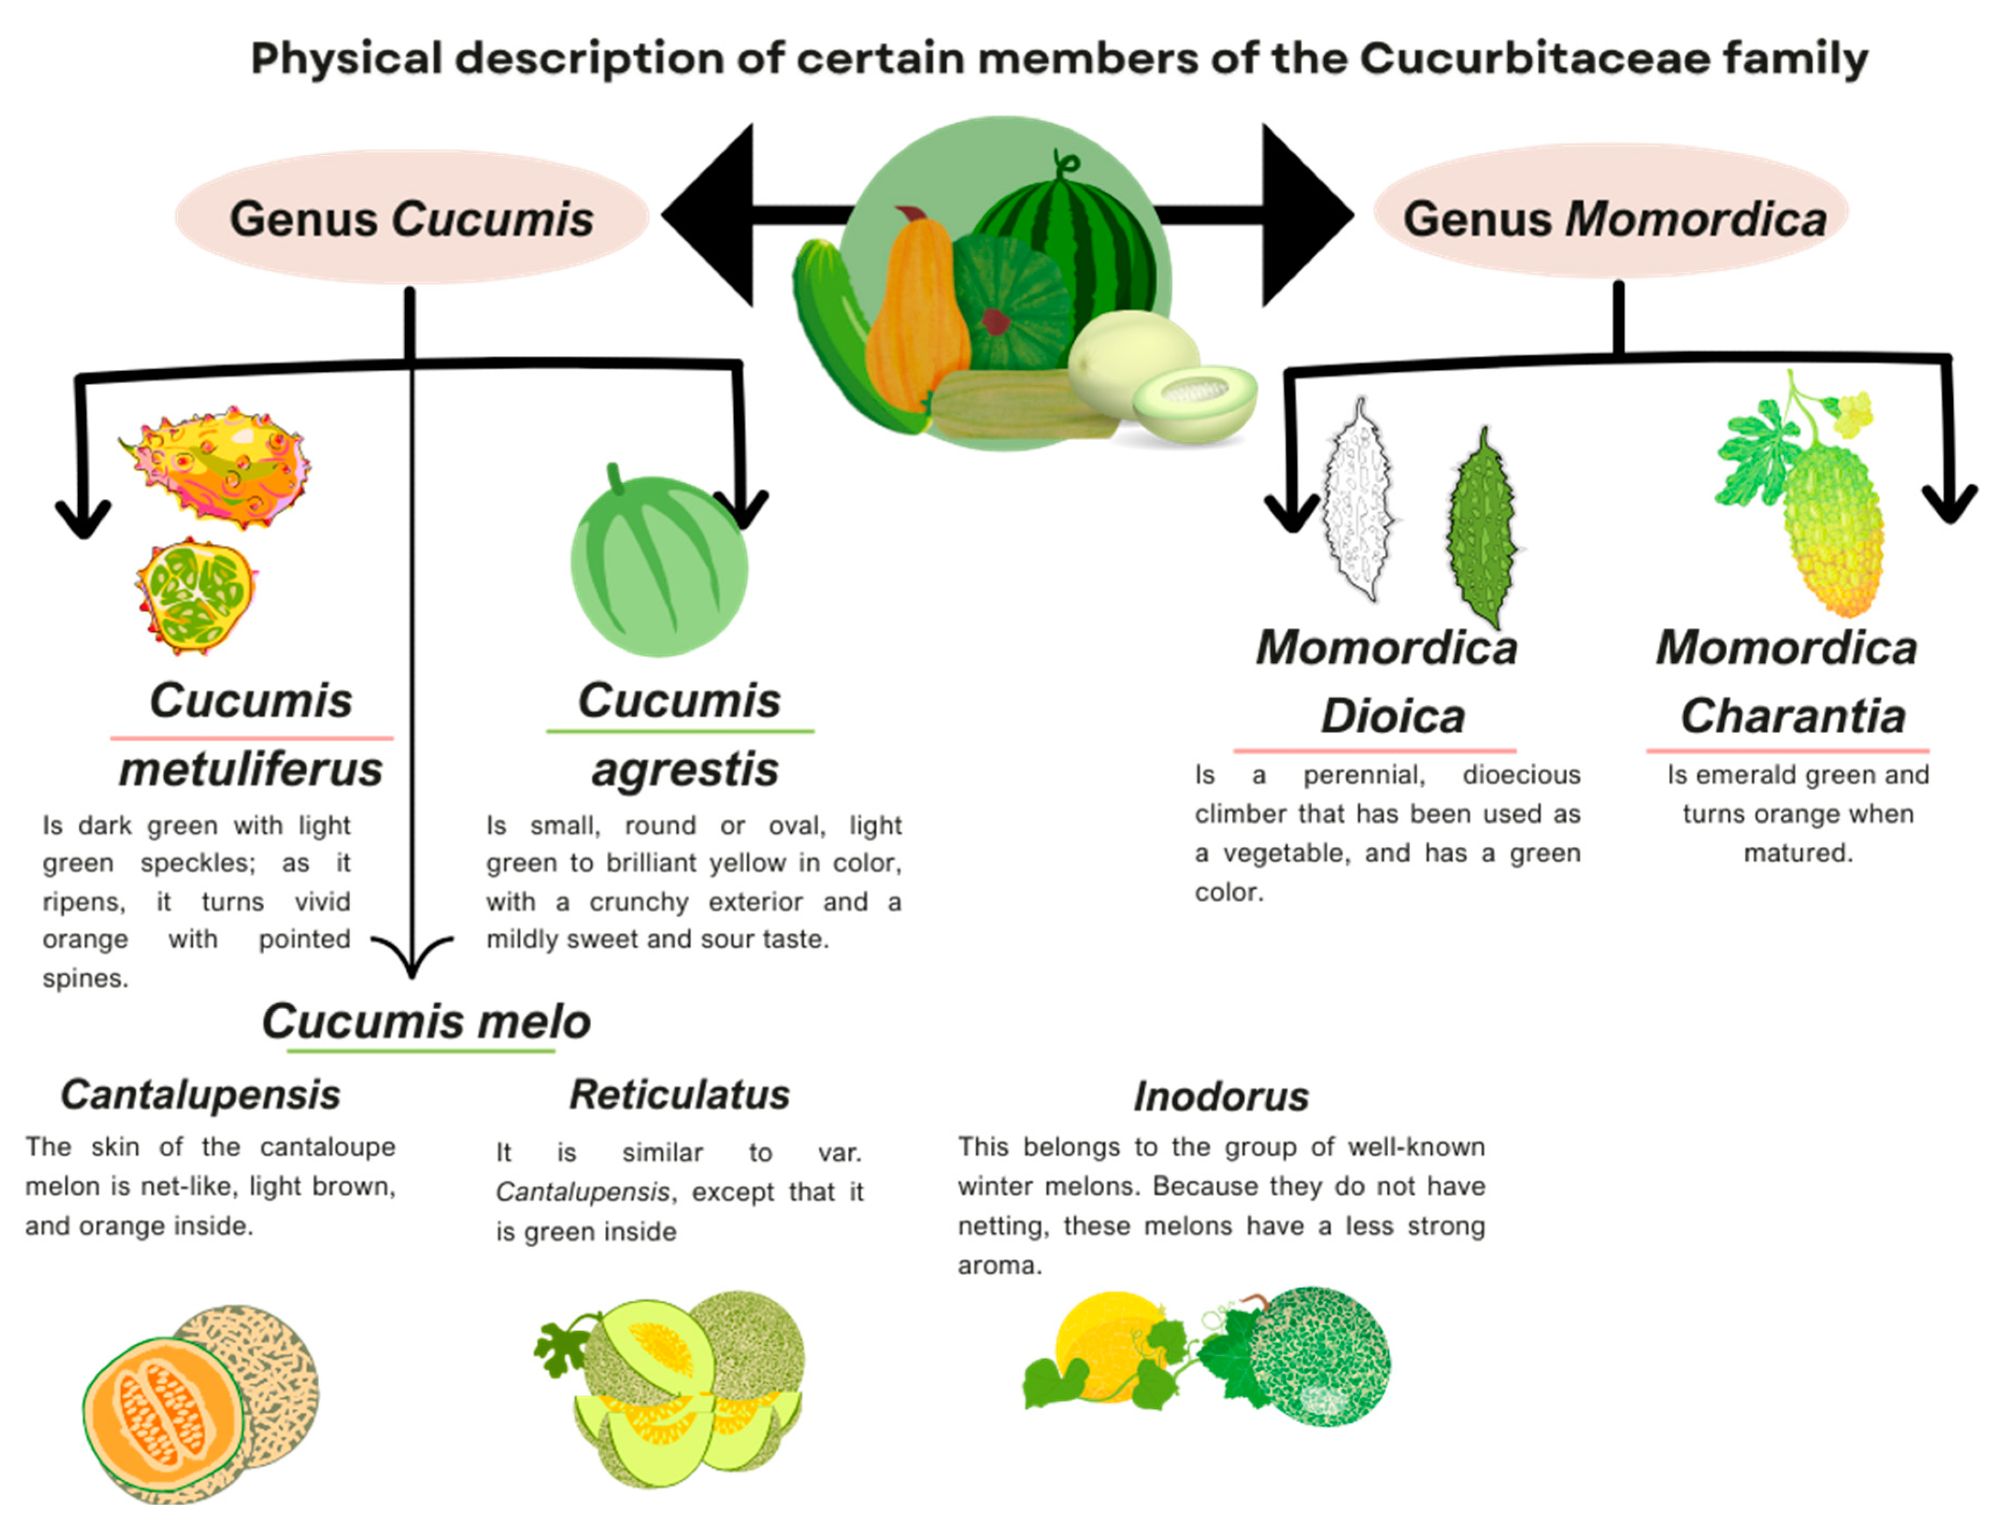 Physical description of the members of the Cucurbitaceous family discussed in this article